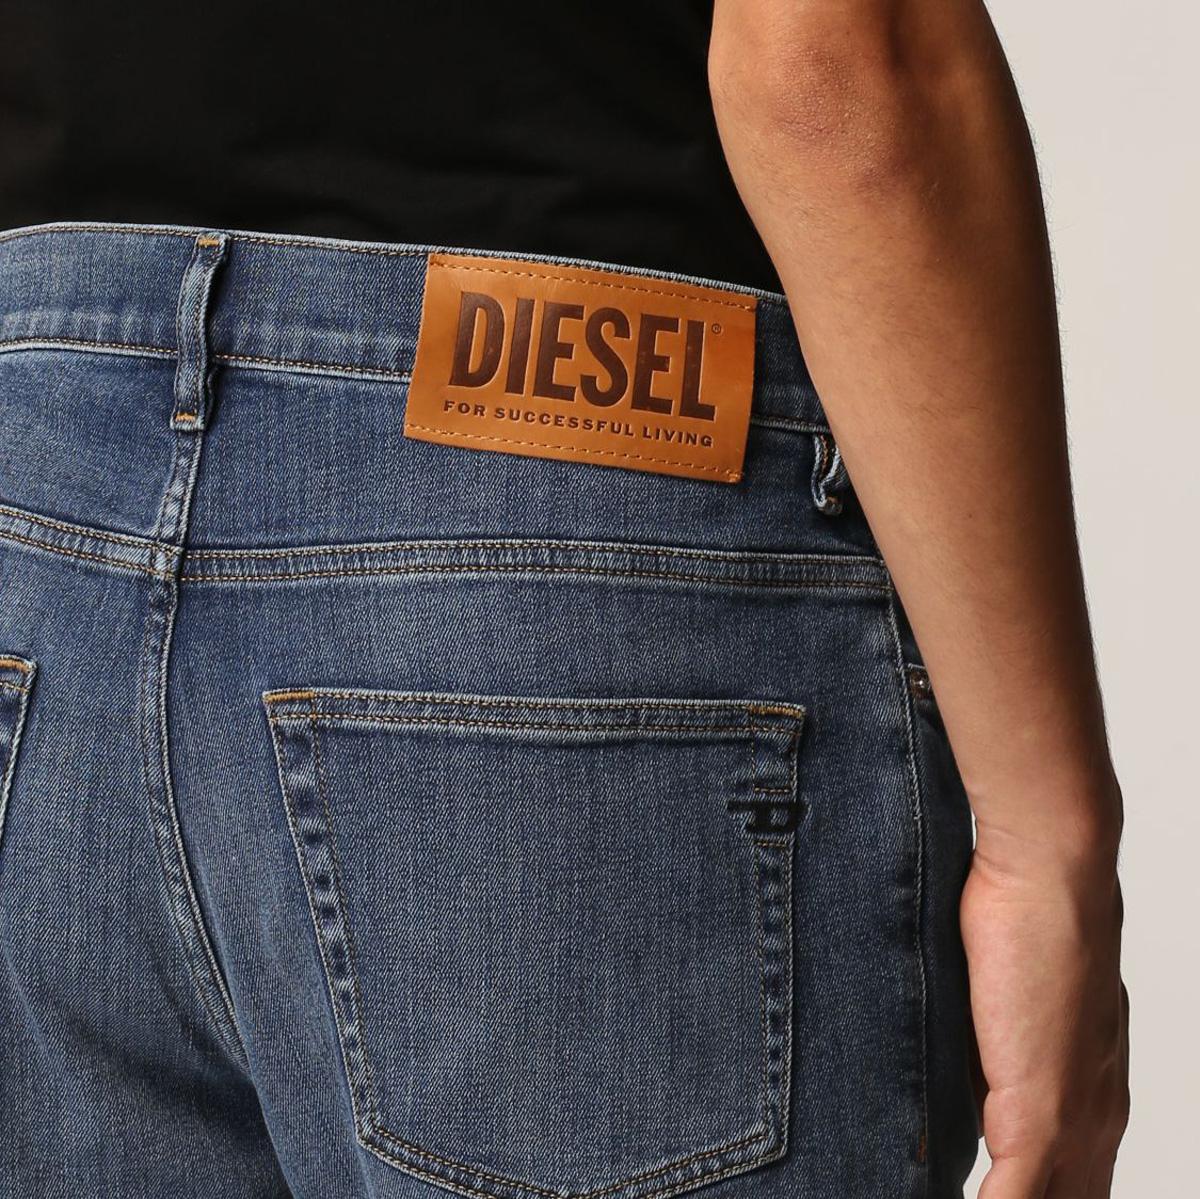 Diesel Jeans Size Chart for Men, Women and kids size conversion tips